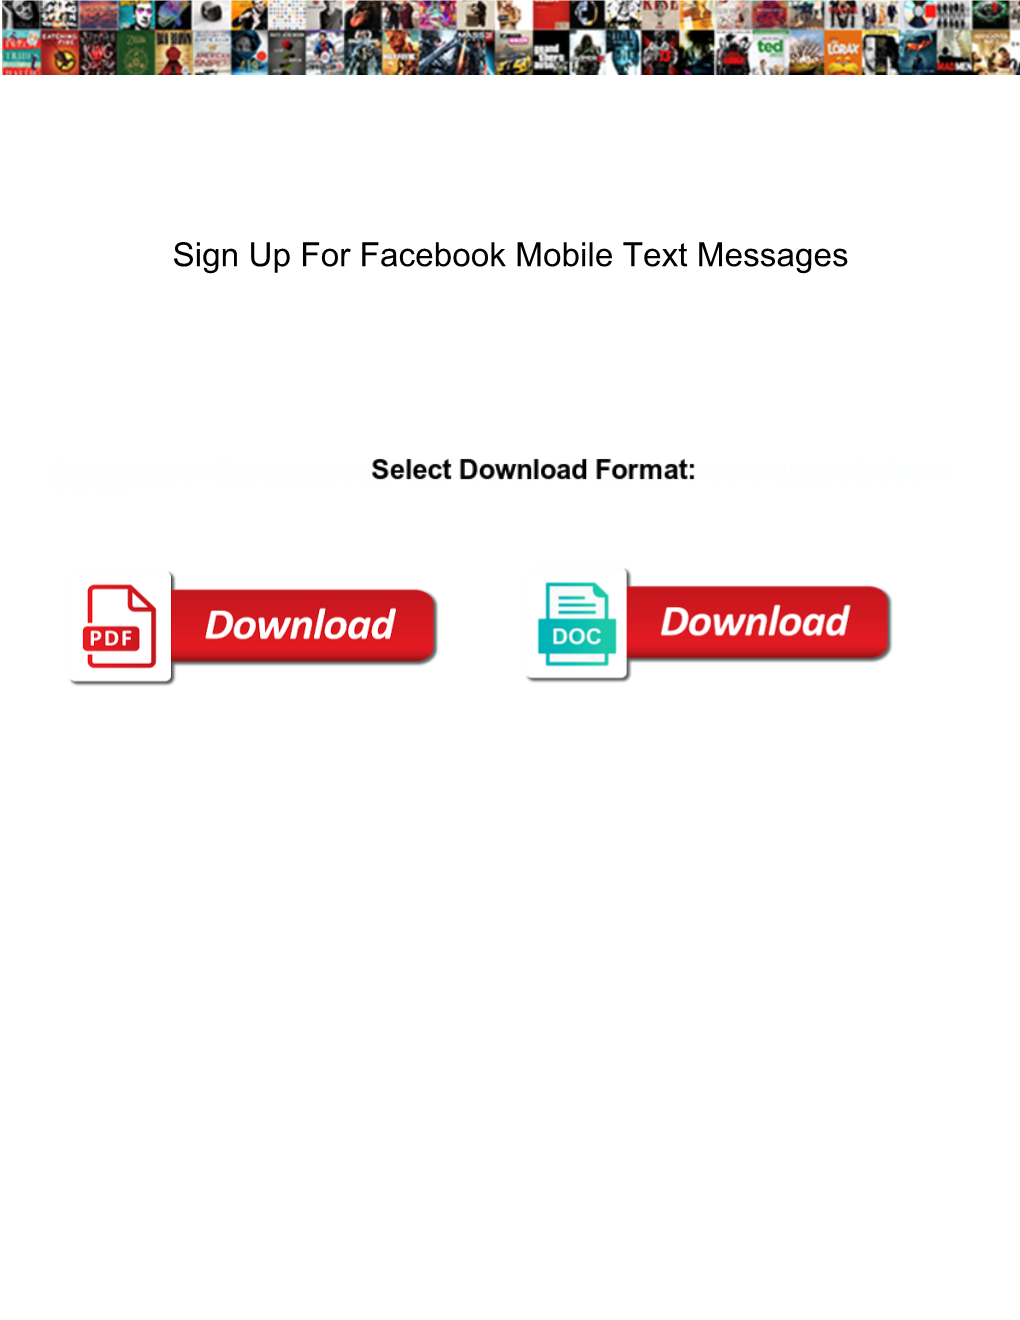 Sign up for Facebook Mobile Text Messages